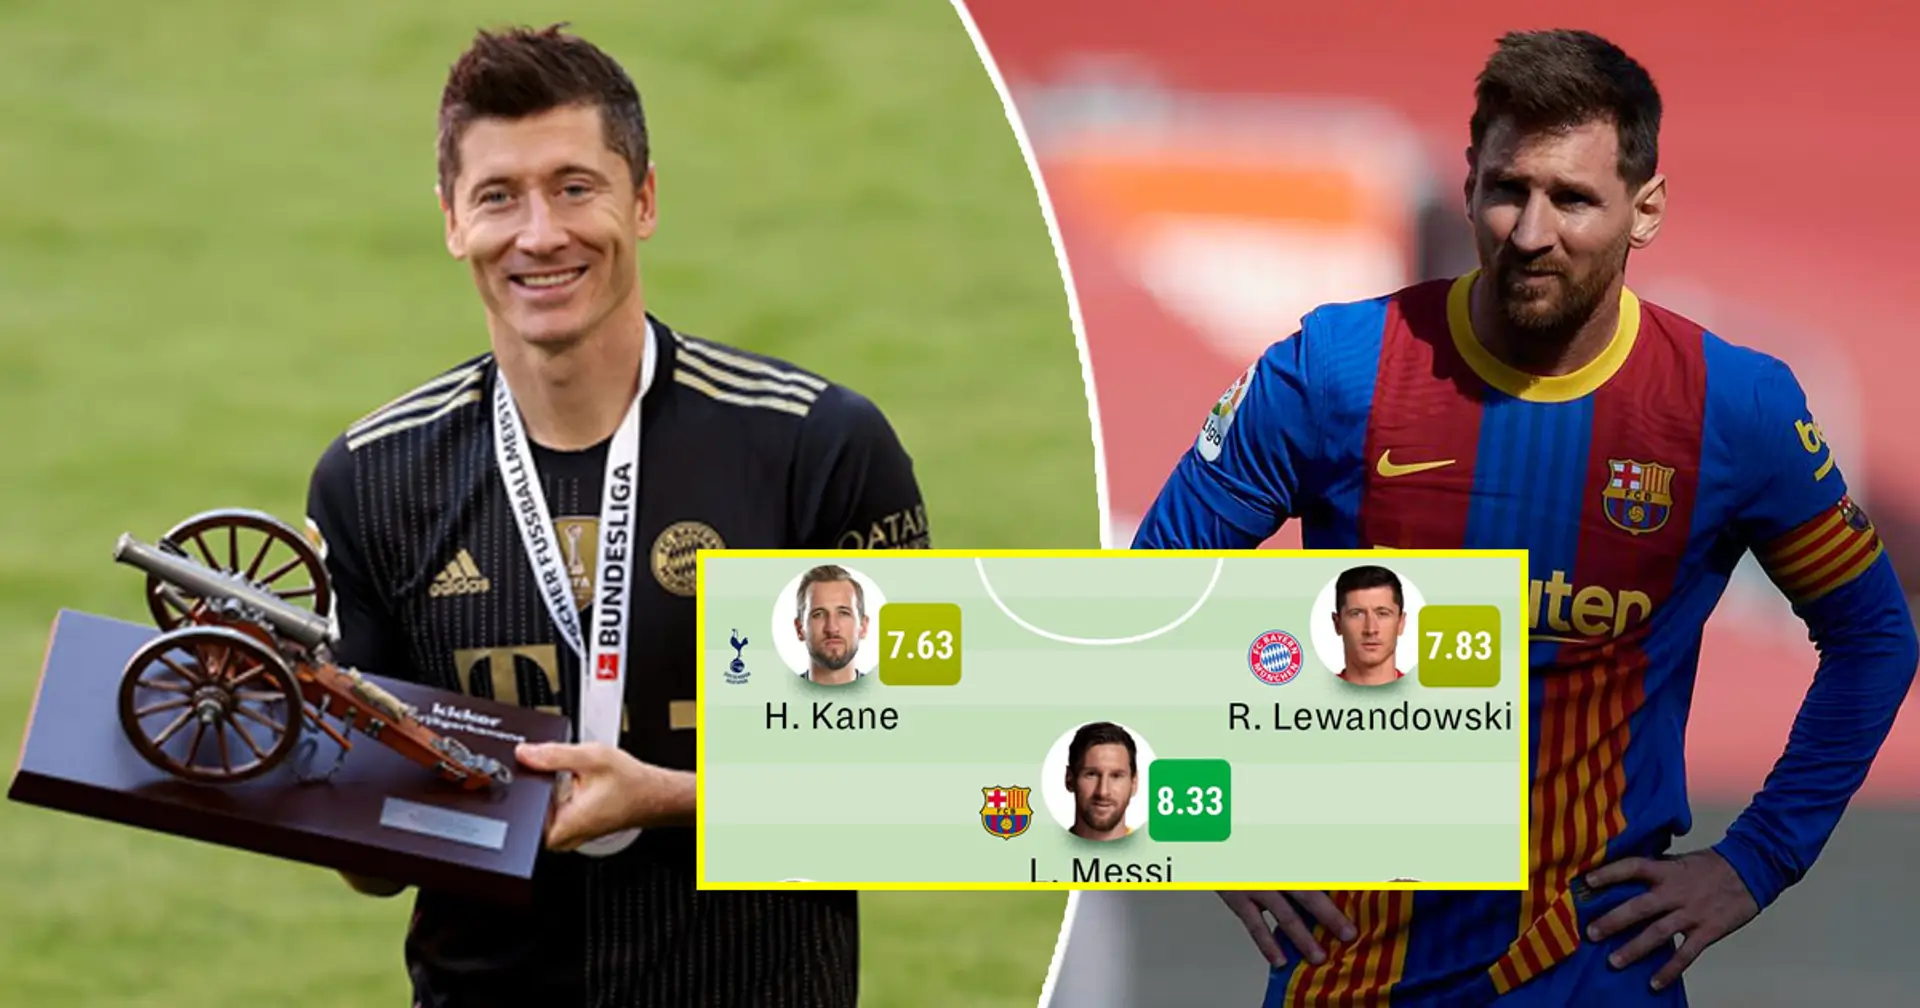 Leo Messi highest rated player in top 5 European league team of the season